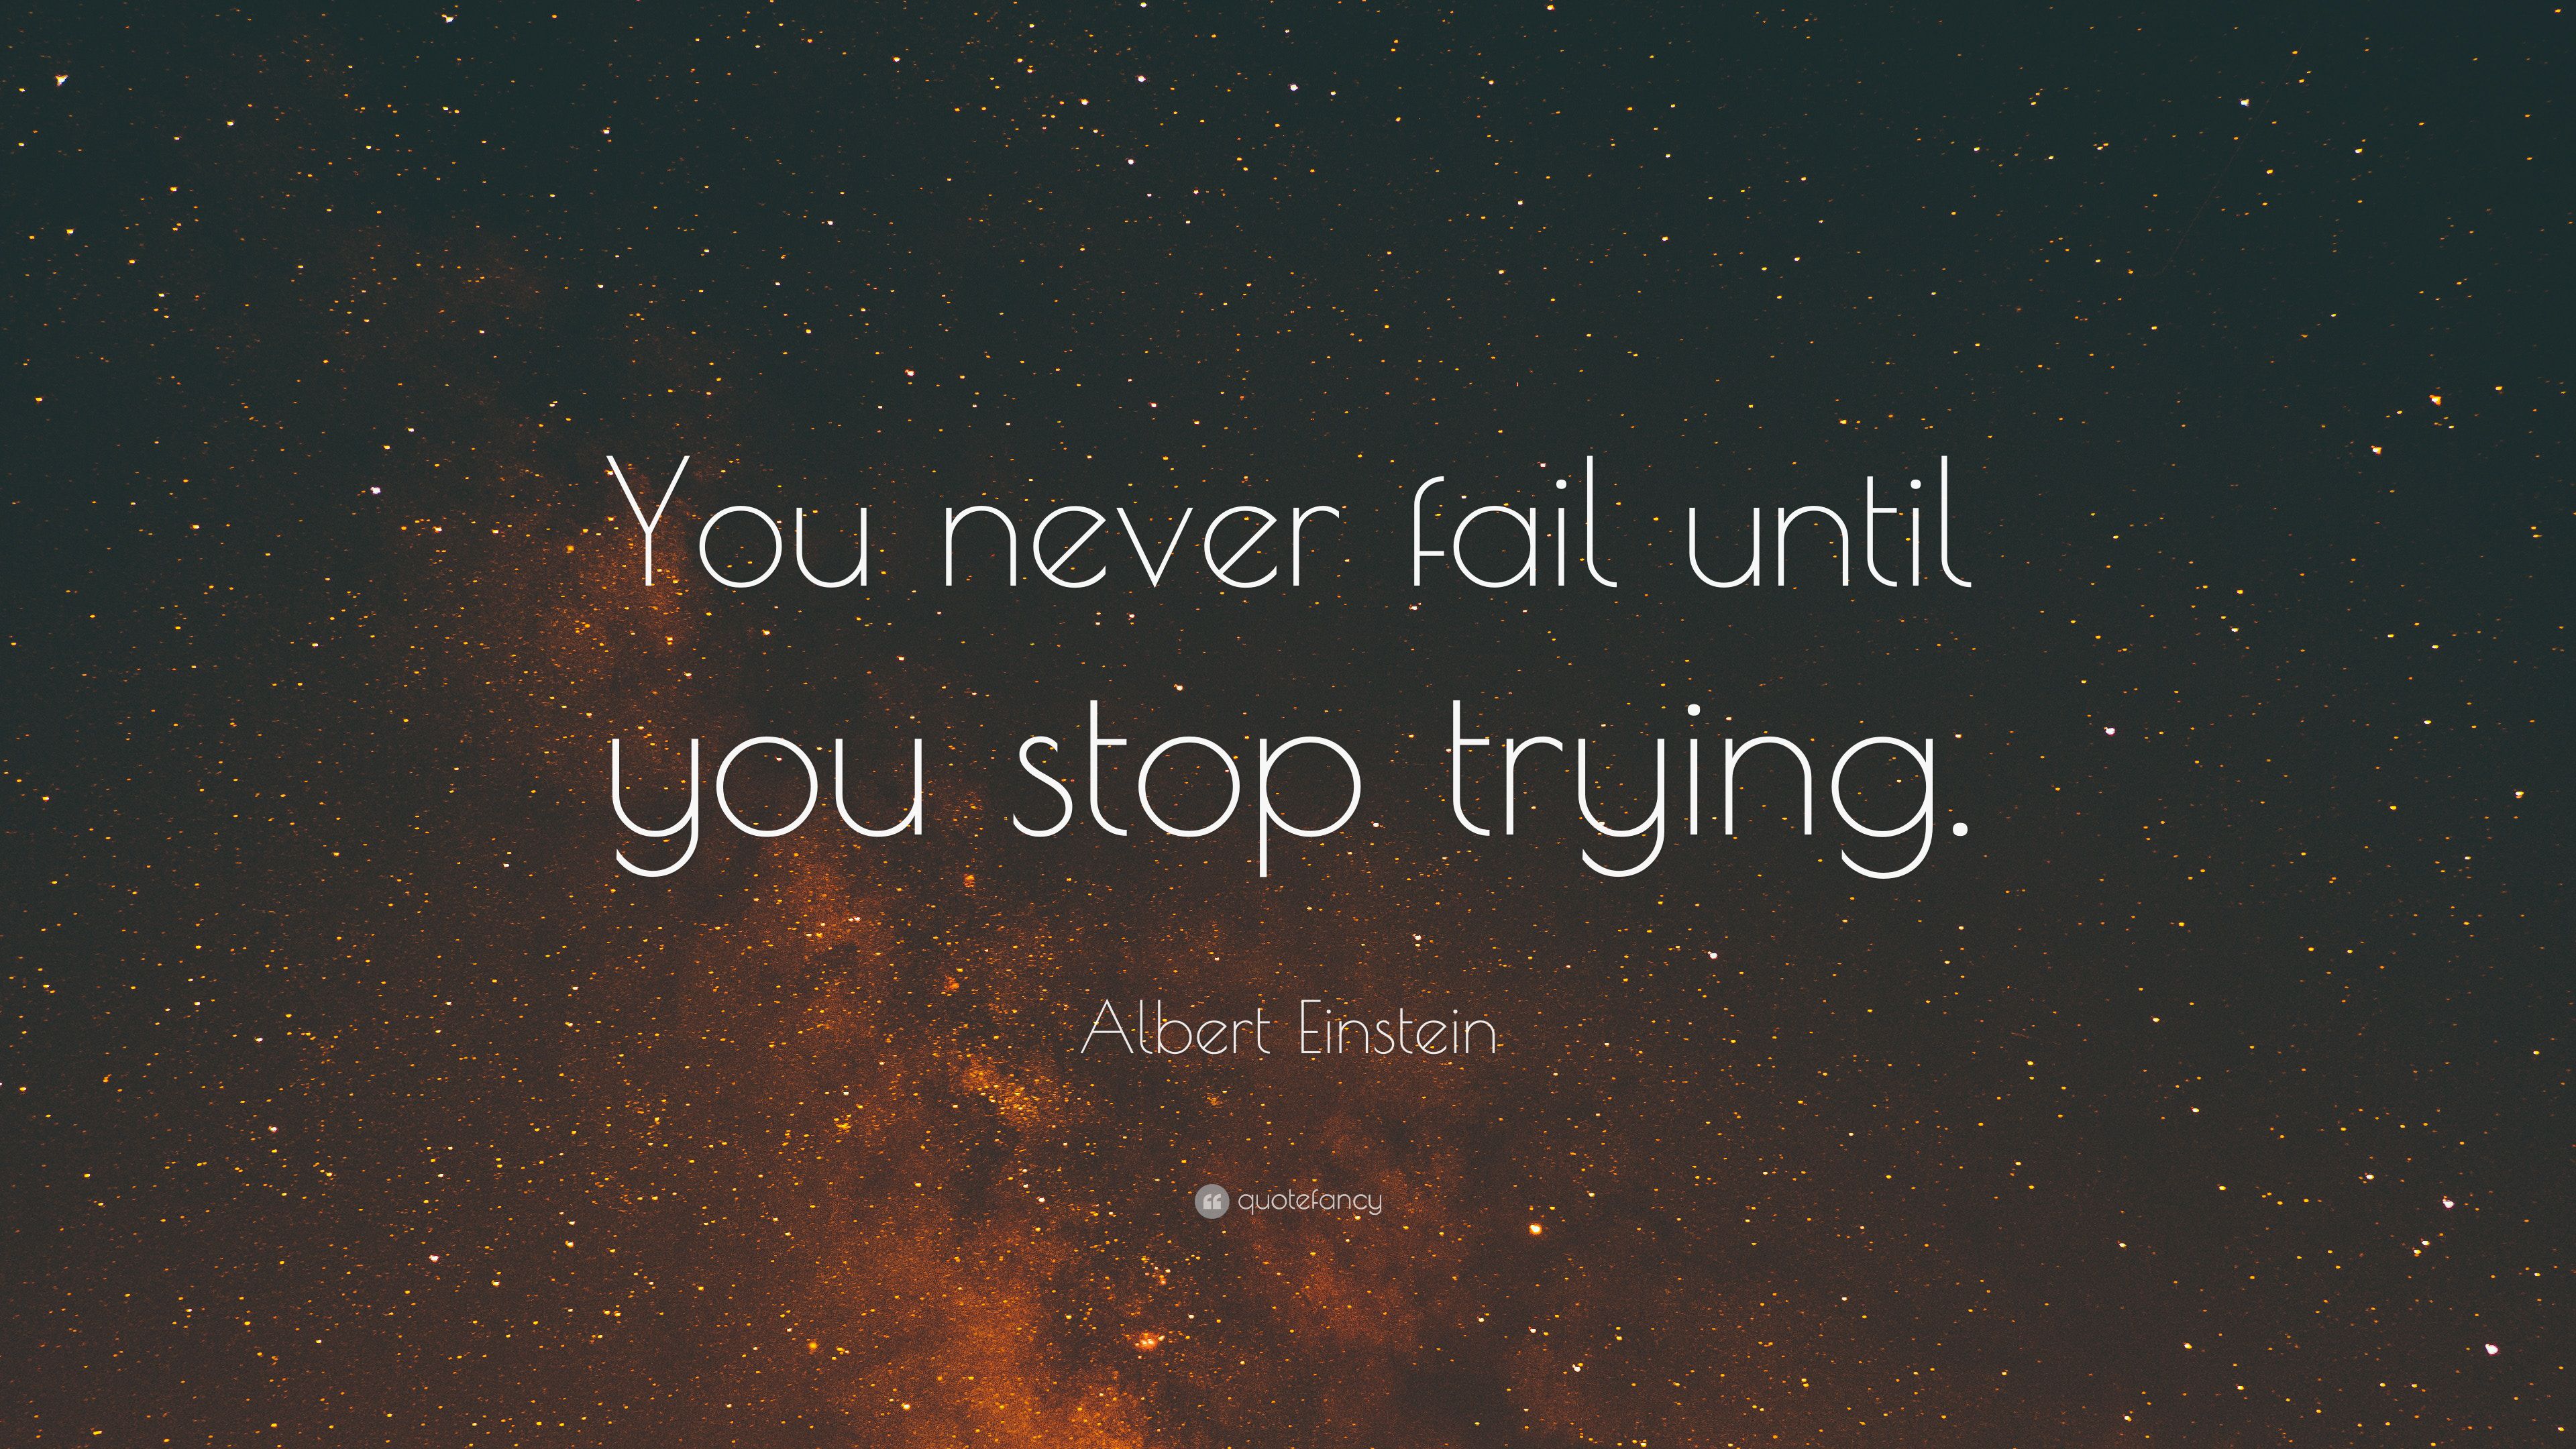 Albert Einstein Quote: “You never fail until you stop trying.” 35